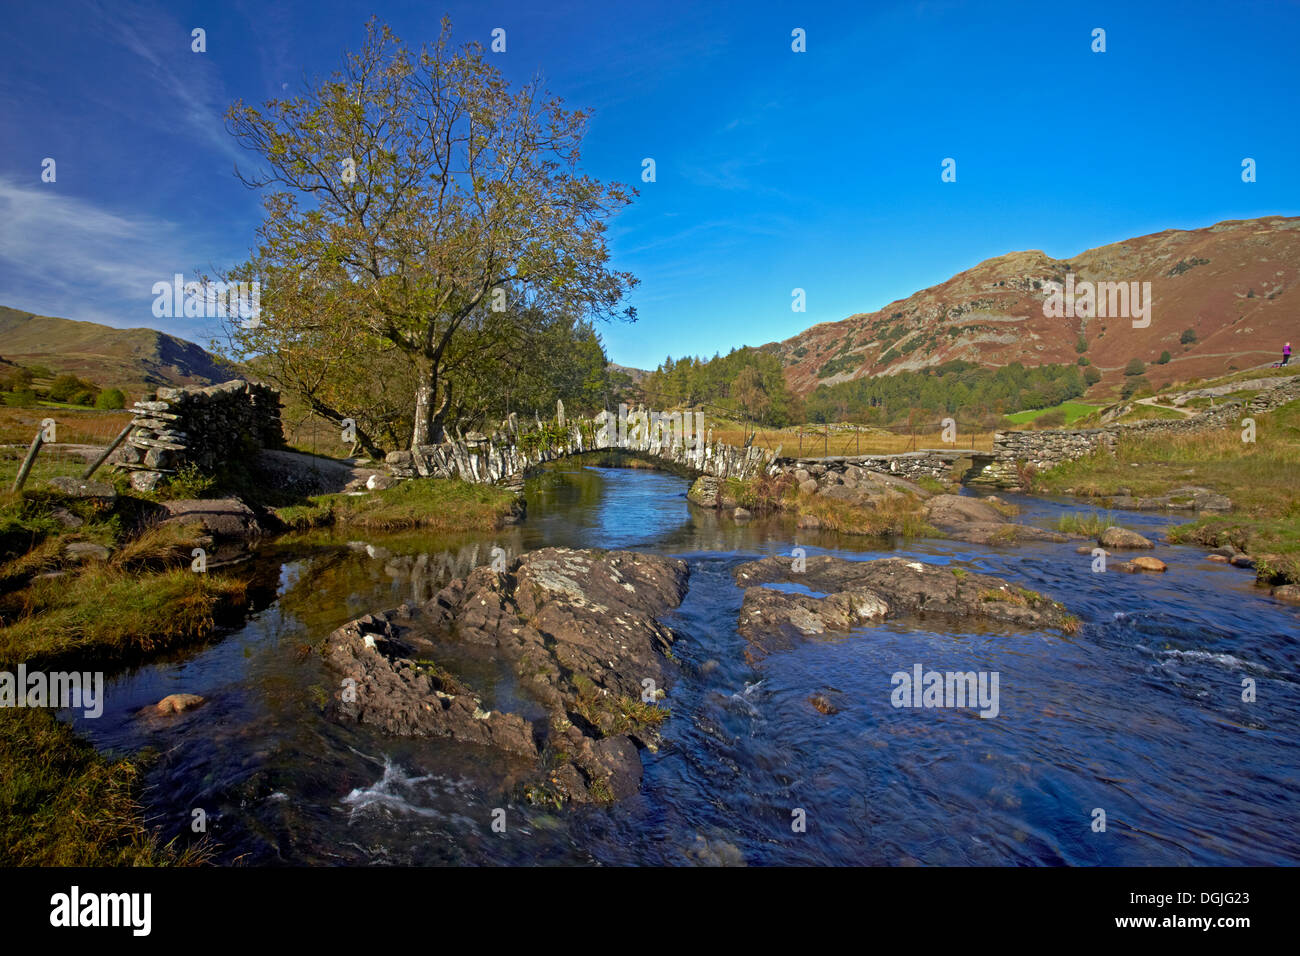 A view of Slater Bridge which crosses the River Brathay on its way from Little Langdale Tarn to Elterwater. Stock Photo